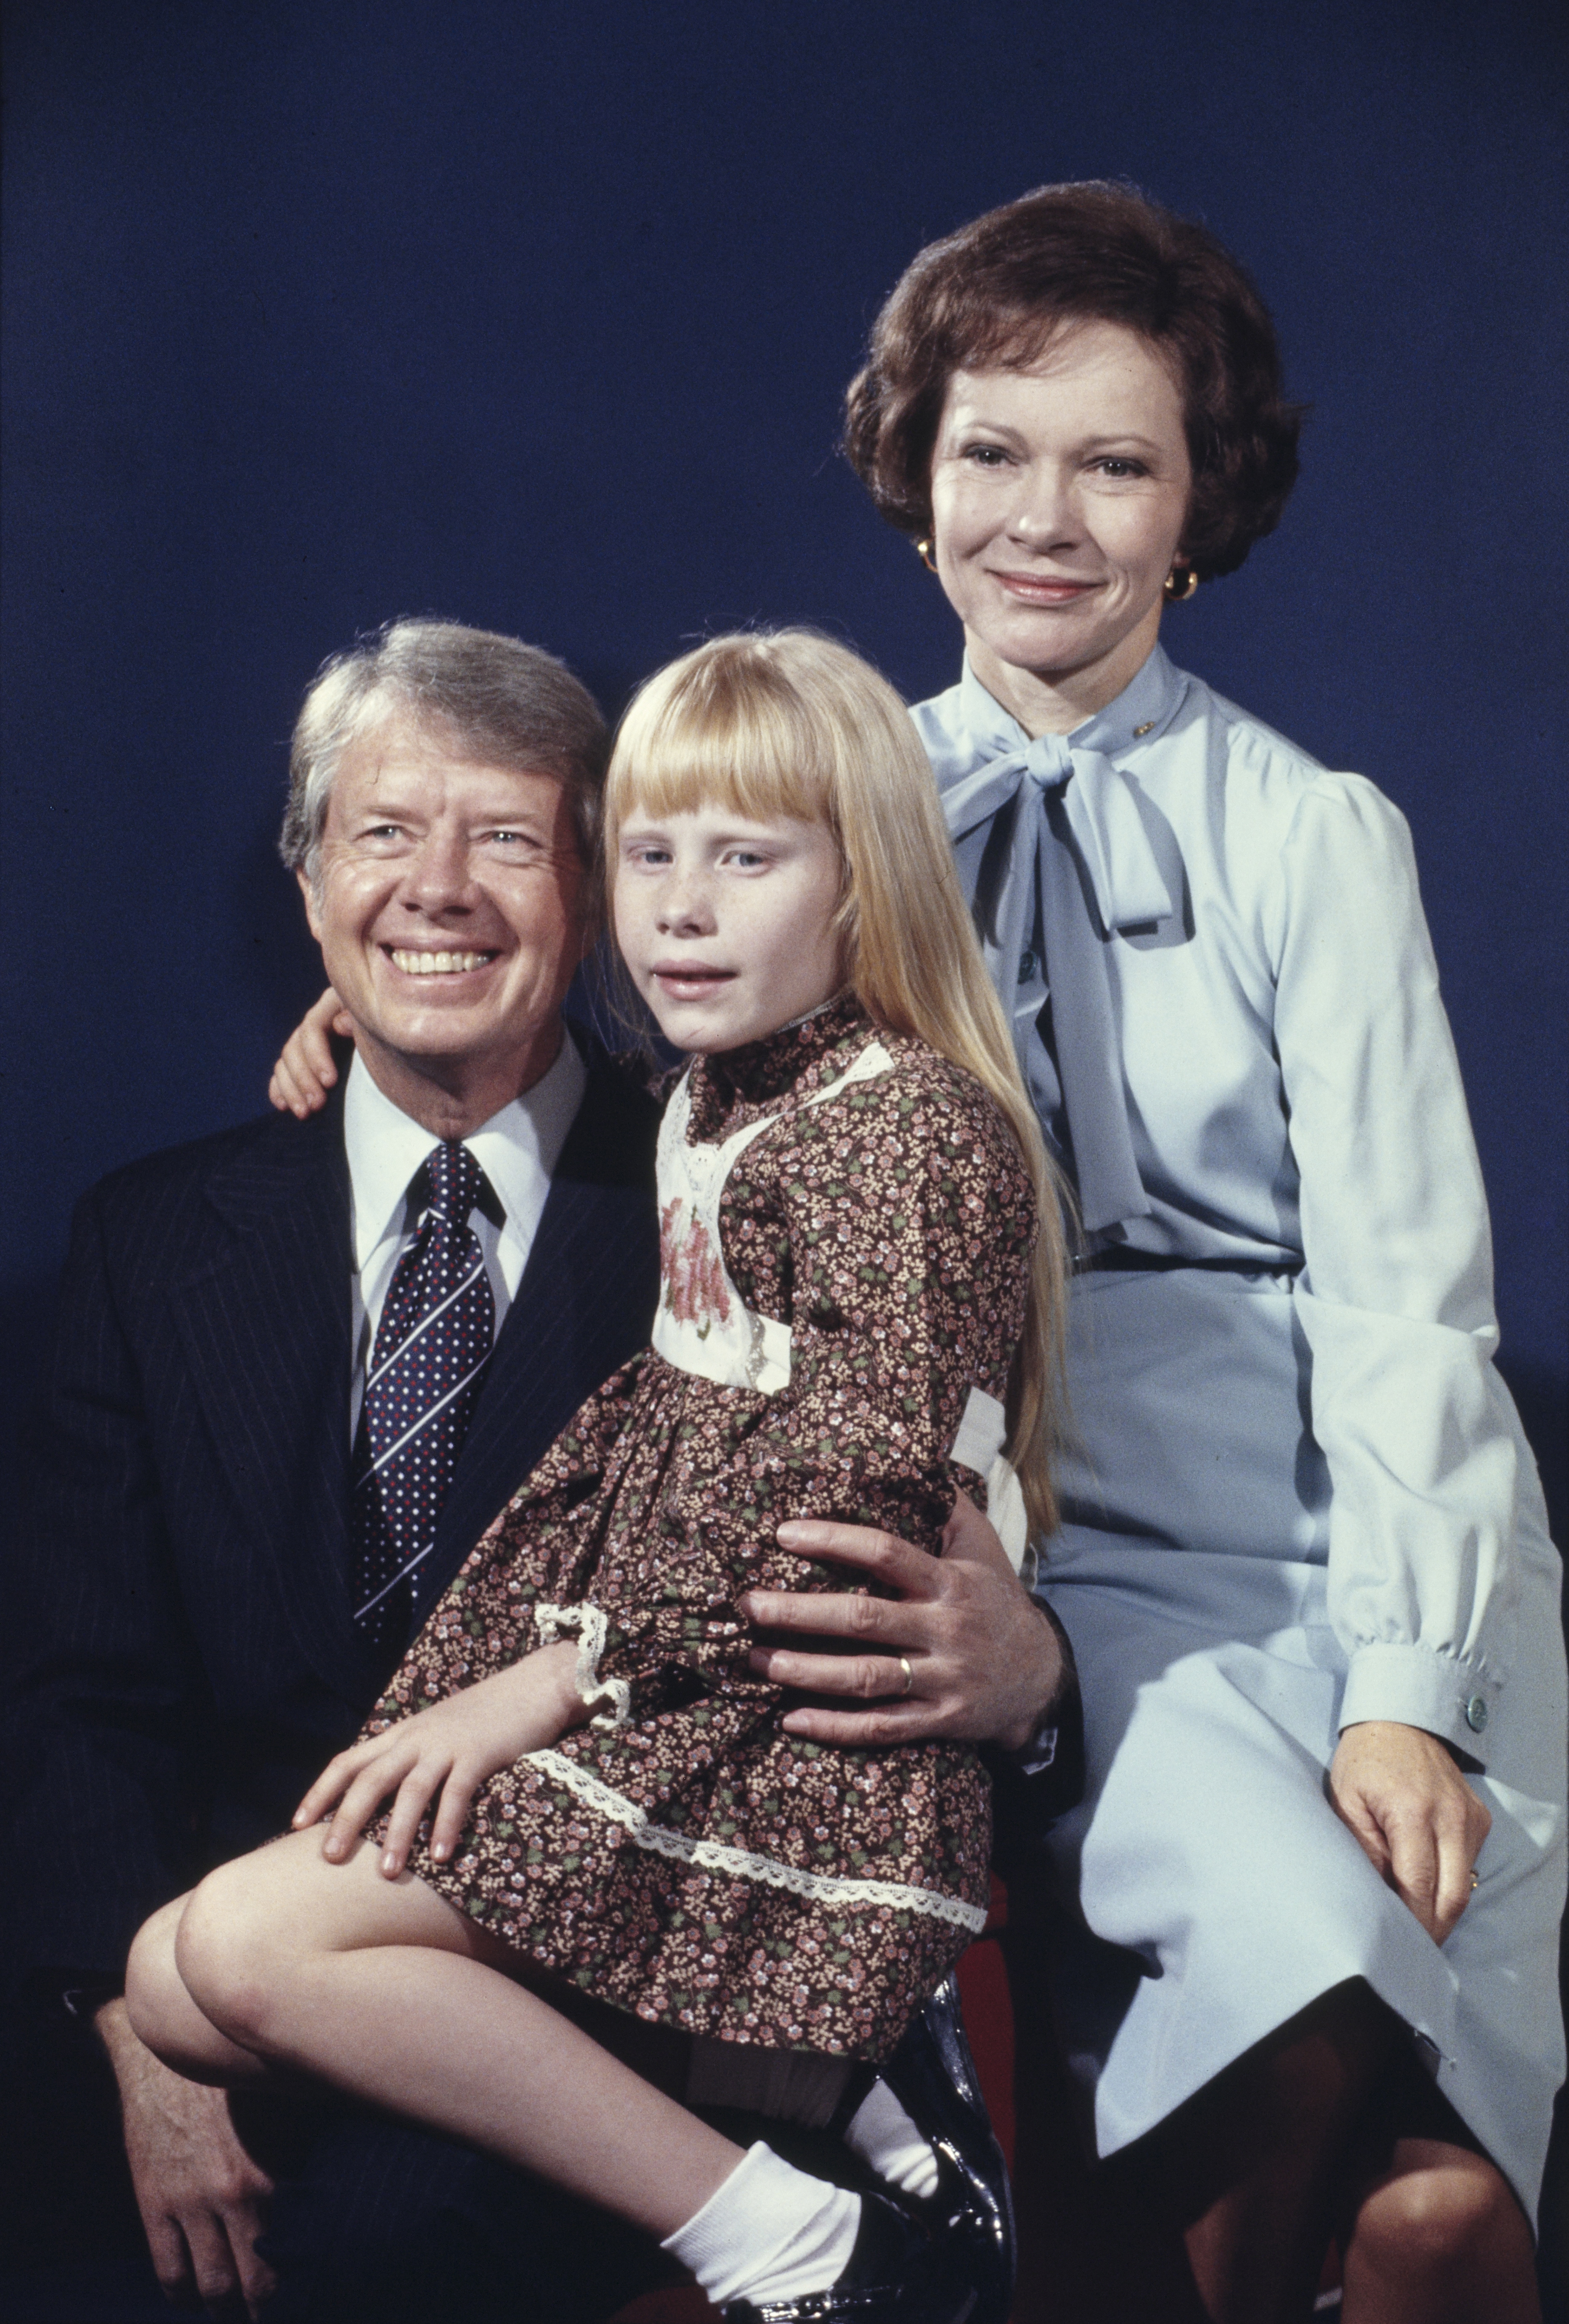 Jimmy Carter, his wife Rosalynn and daughter Amy in Plains, Georgia in 1976 | Source: Getty Images